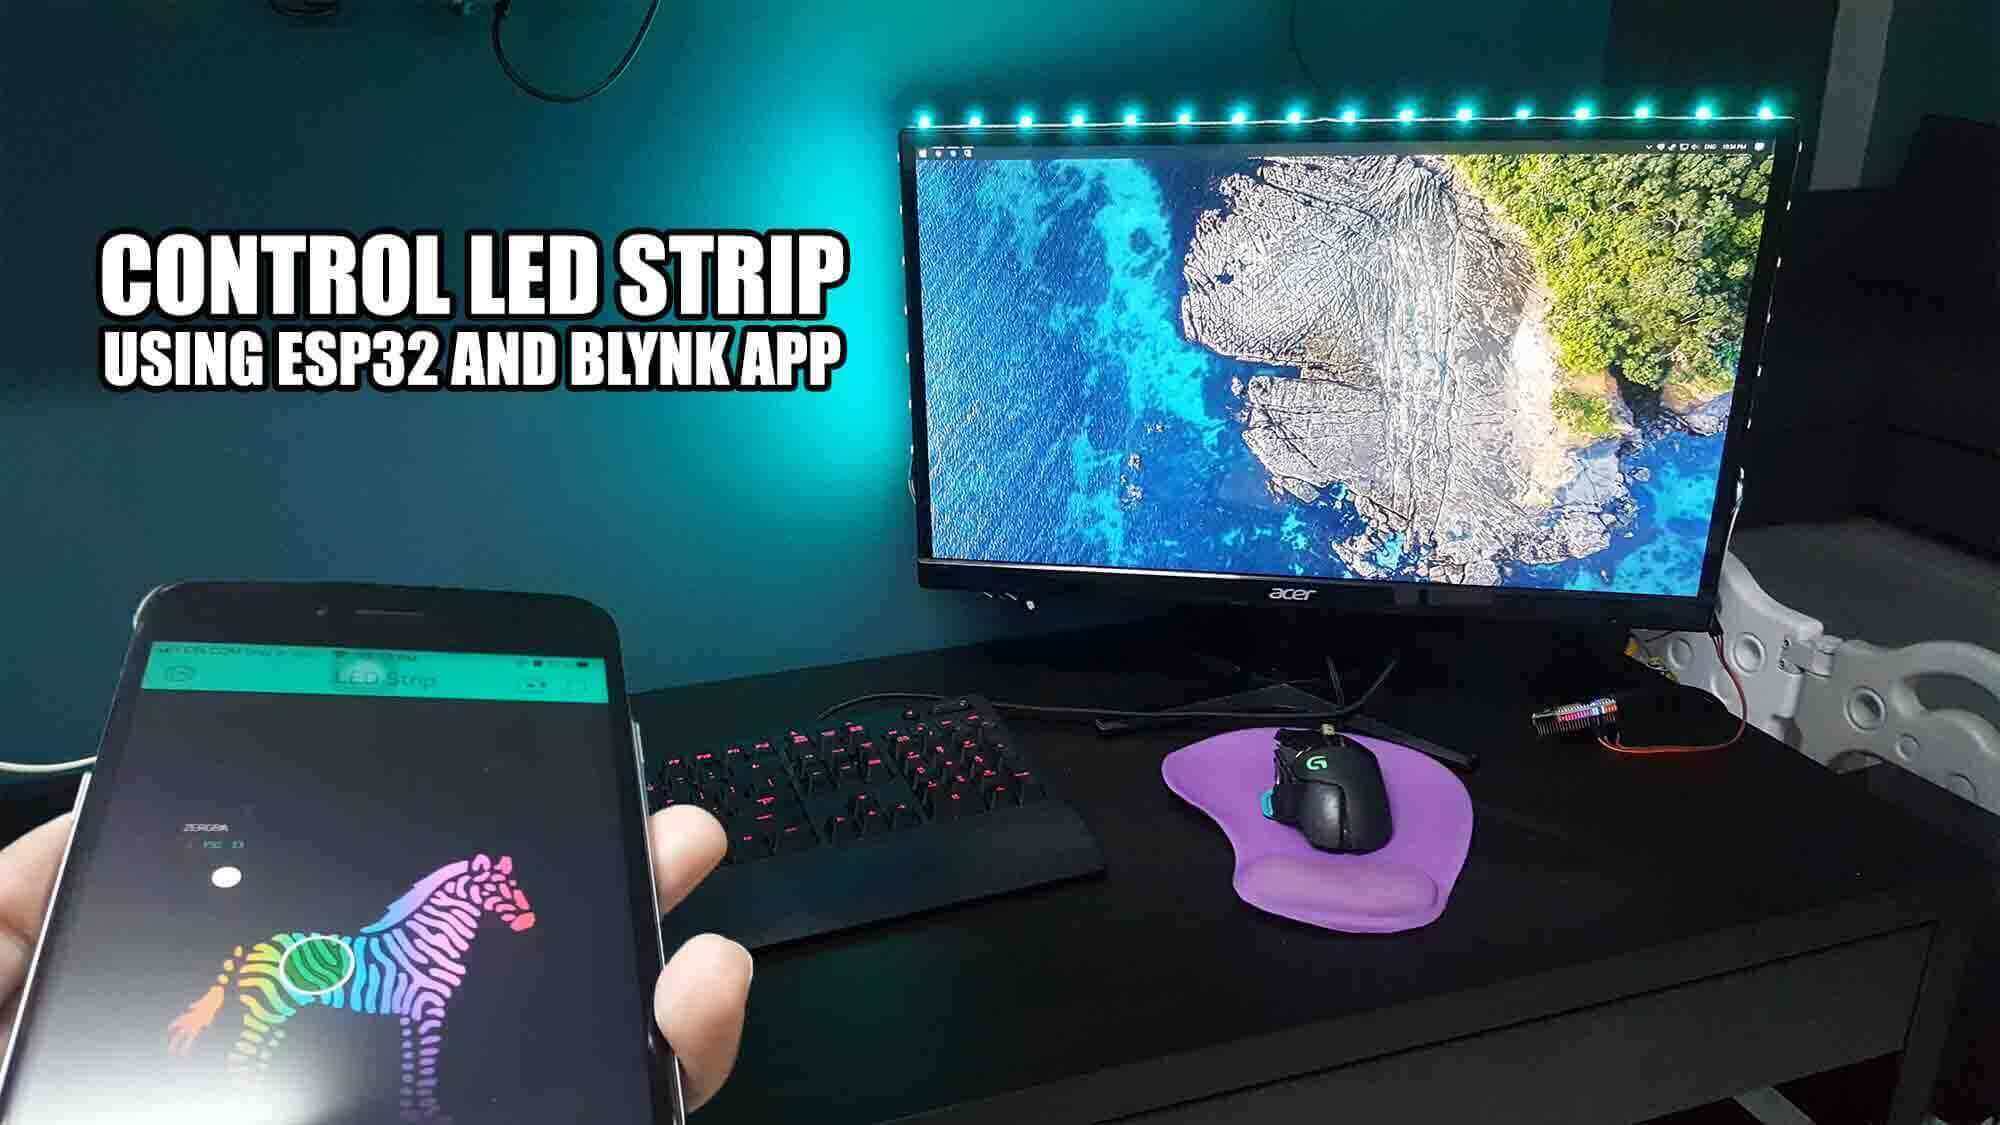 Control LED Strip Using ESP32 and Blynk App